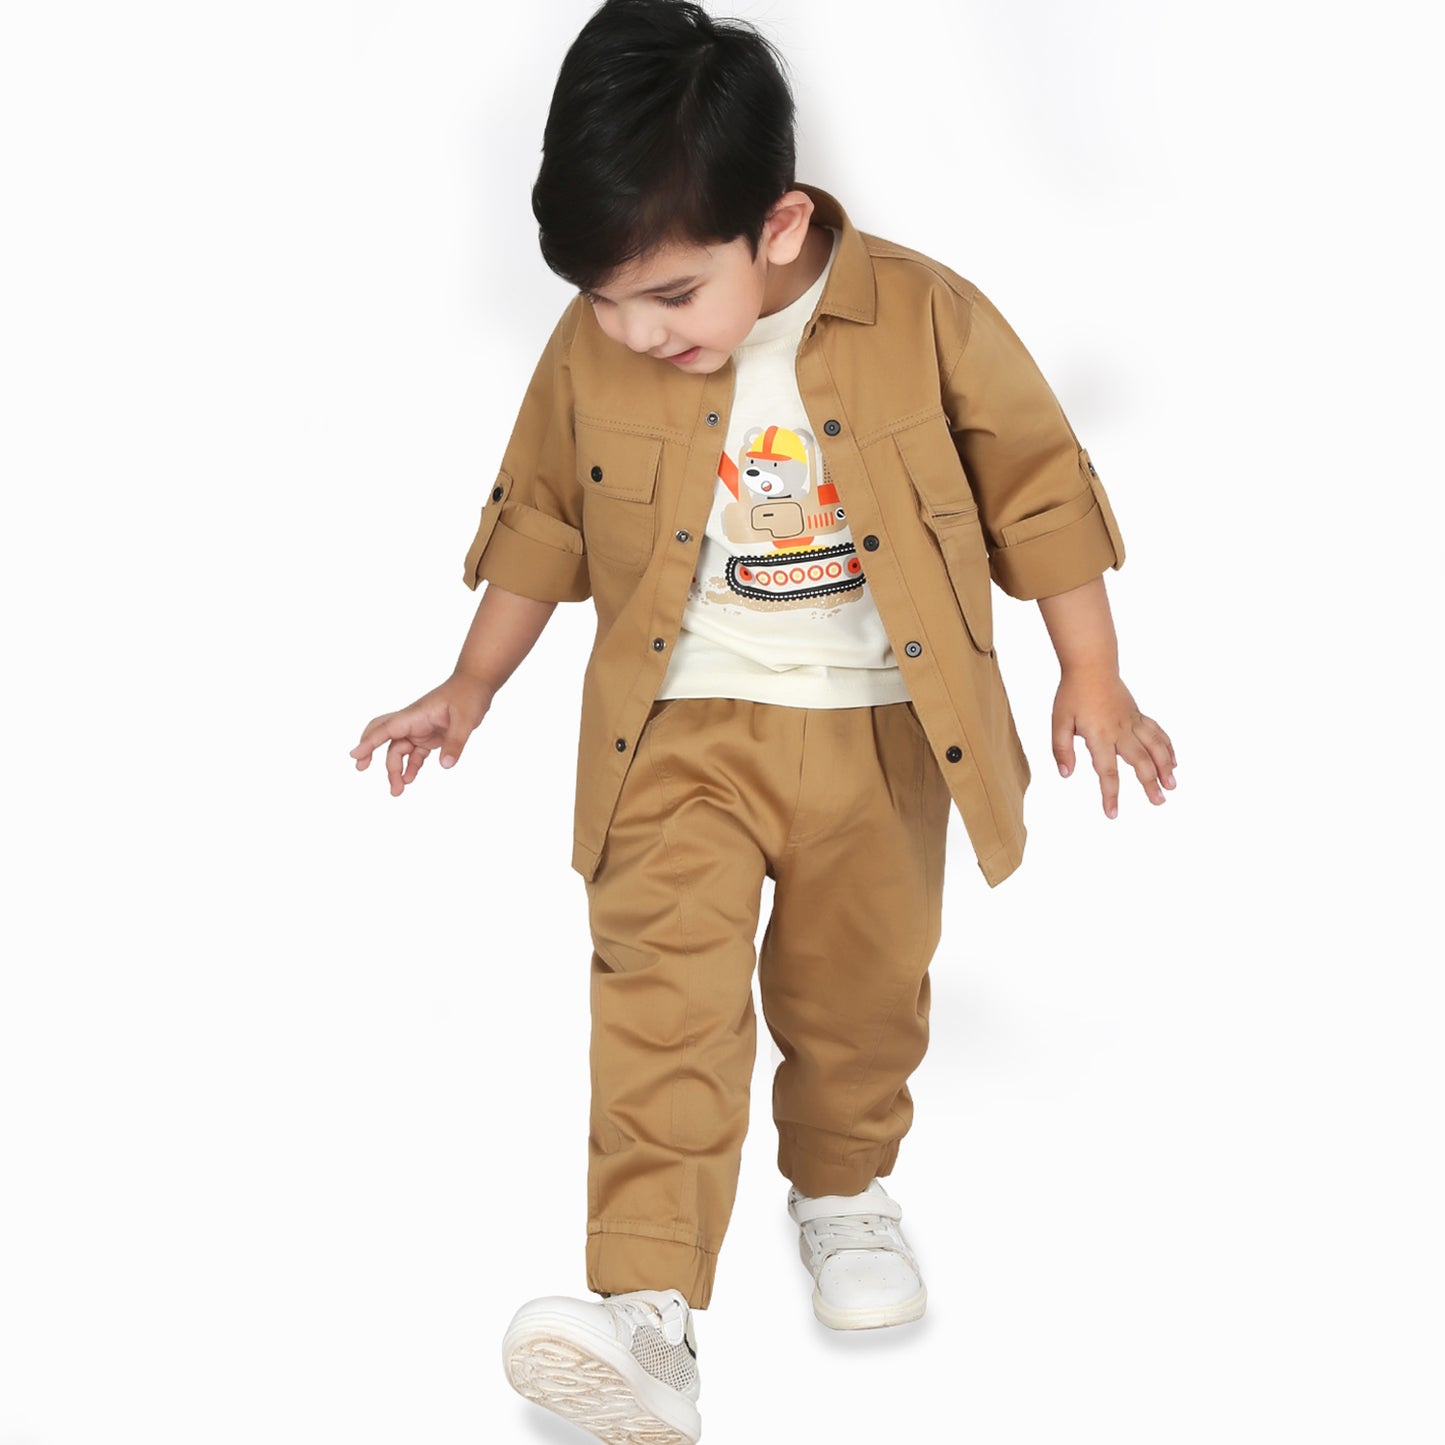 Adorable Adventures Await: 3-Piece Set for Tiny Trendsetting Tots!